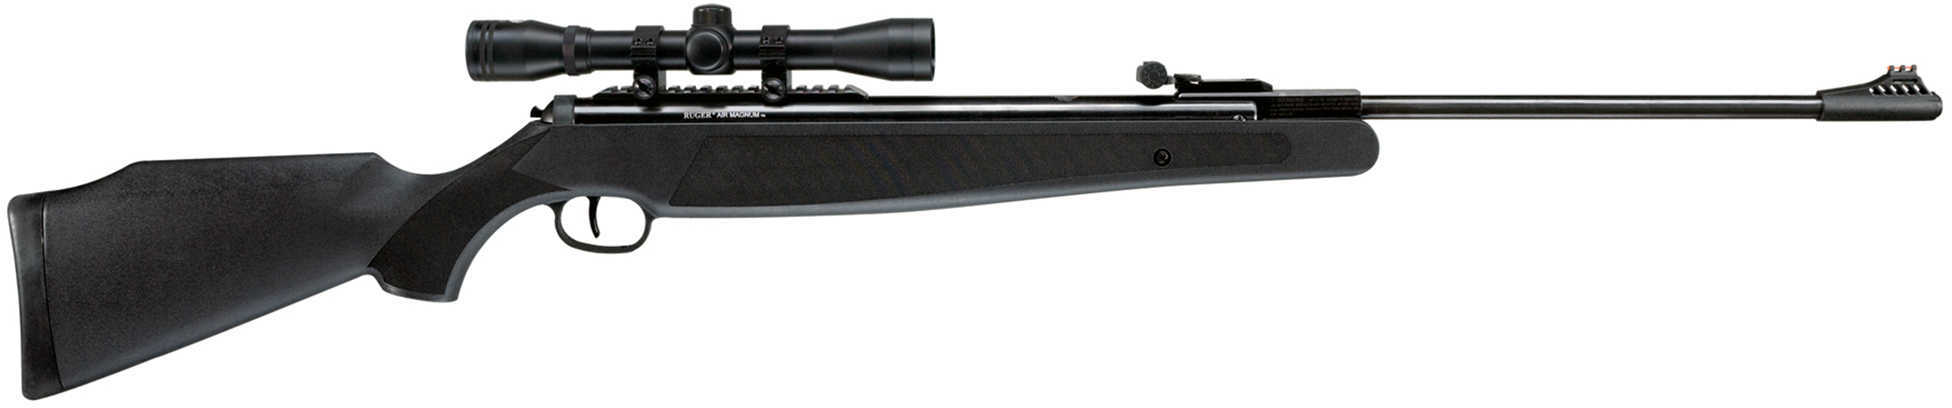 RWS Ruger® Air Magnum .22 Combo Rifle W/4X32MM Scope 1200 Fps